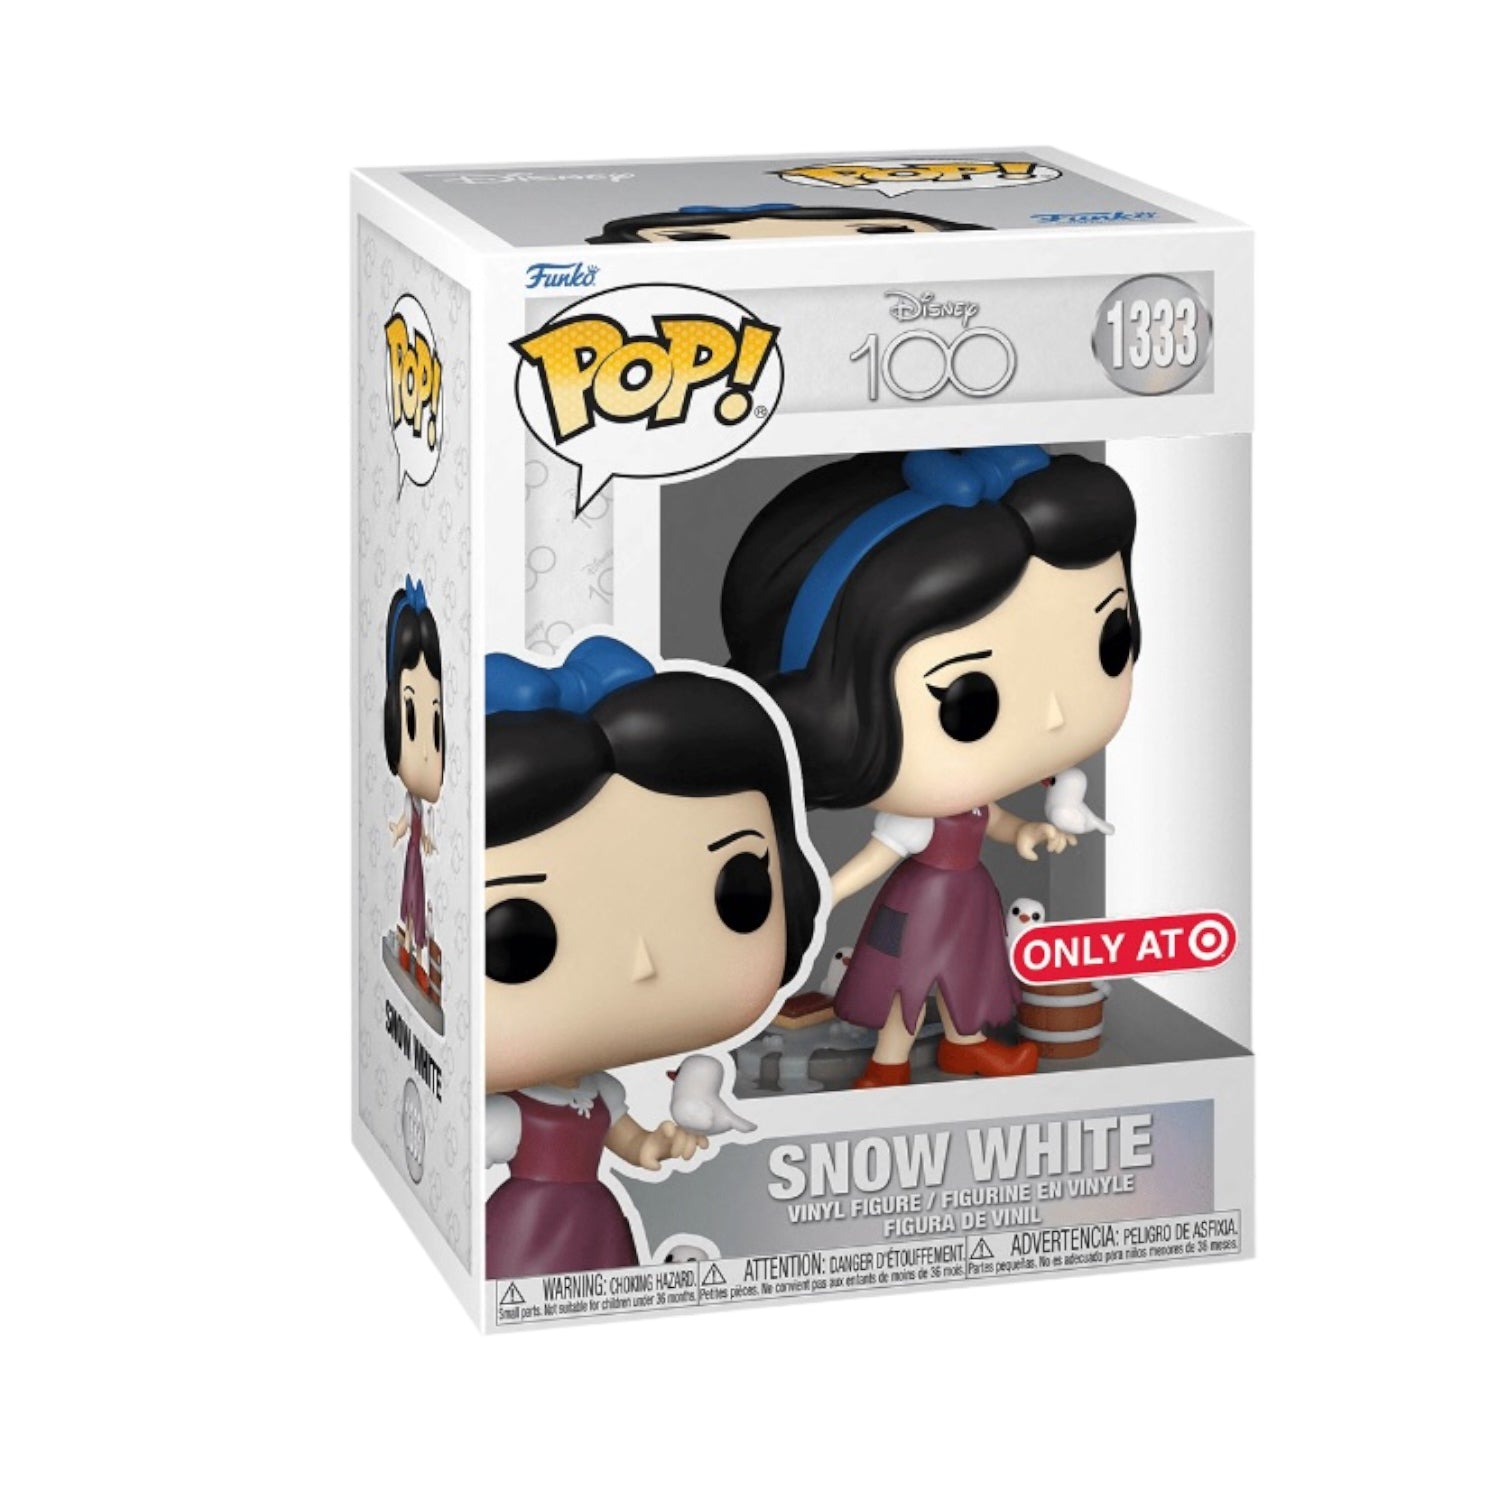 Snow White #1333 Funko Pop! - Disney 100 - Target Exclusive - Angry Cat